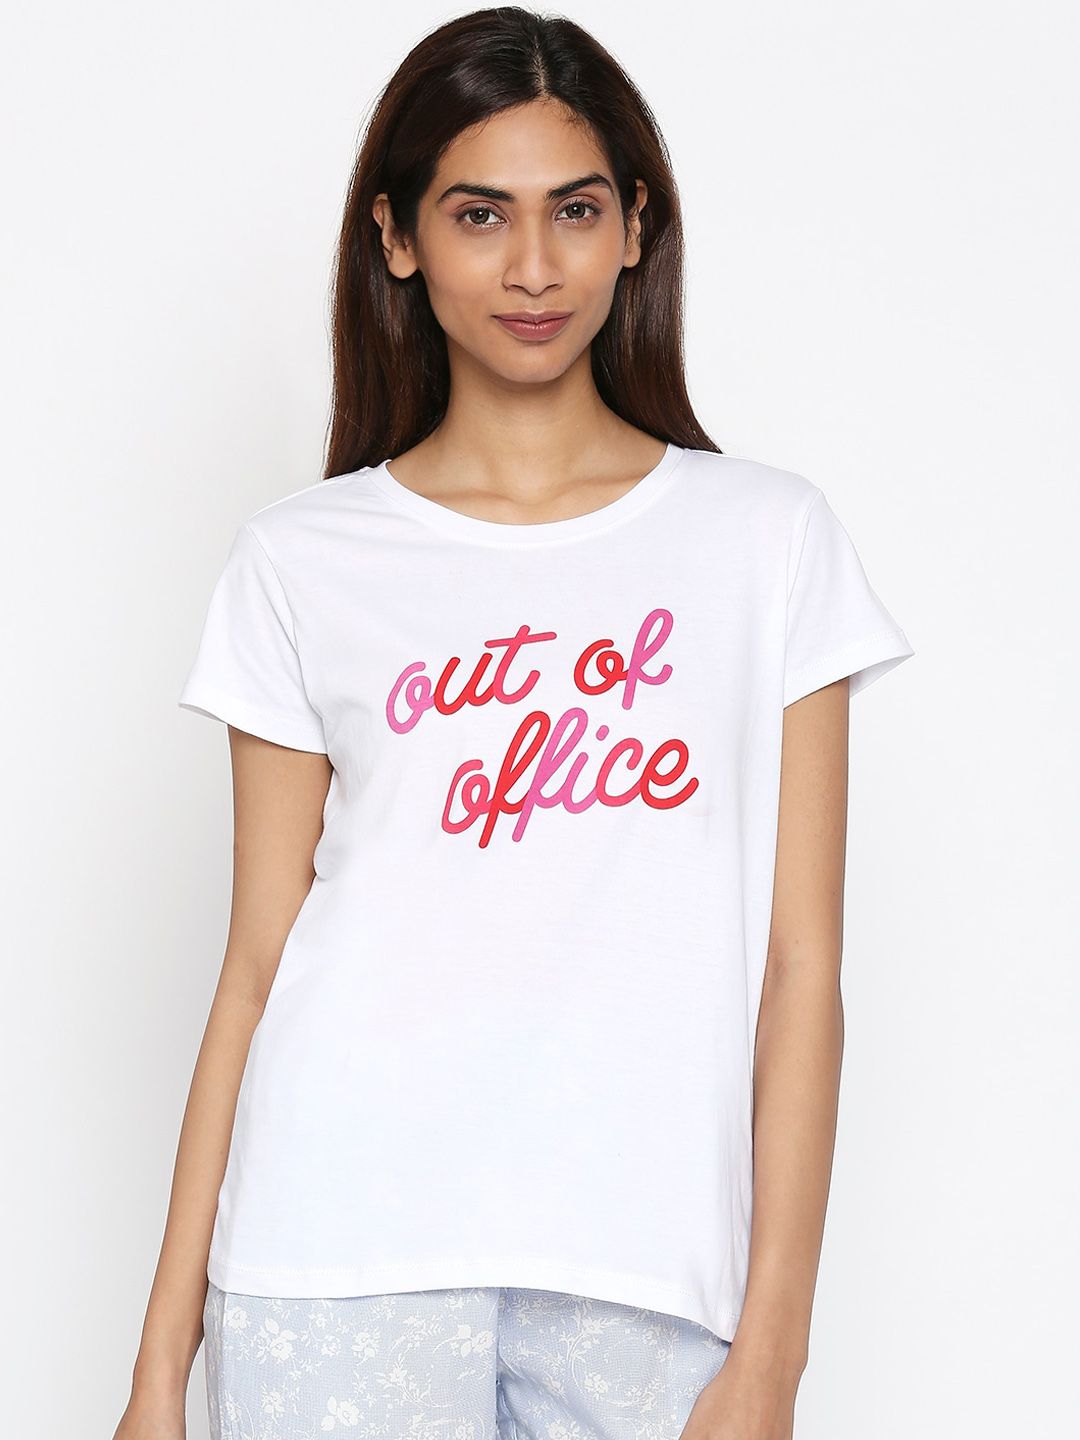 Dreamz by Pantaloons Women White Printed Pure Cotton Lounge tshirt Price in India